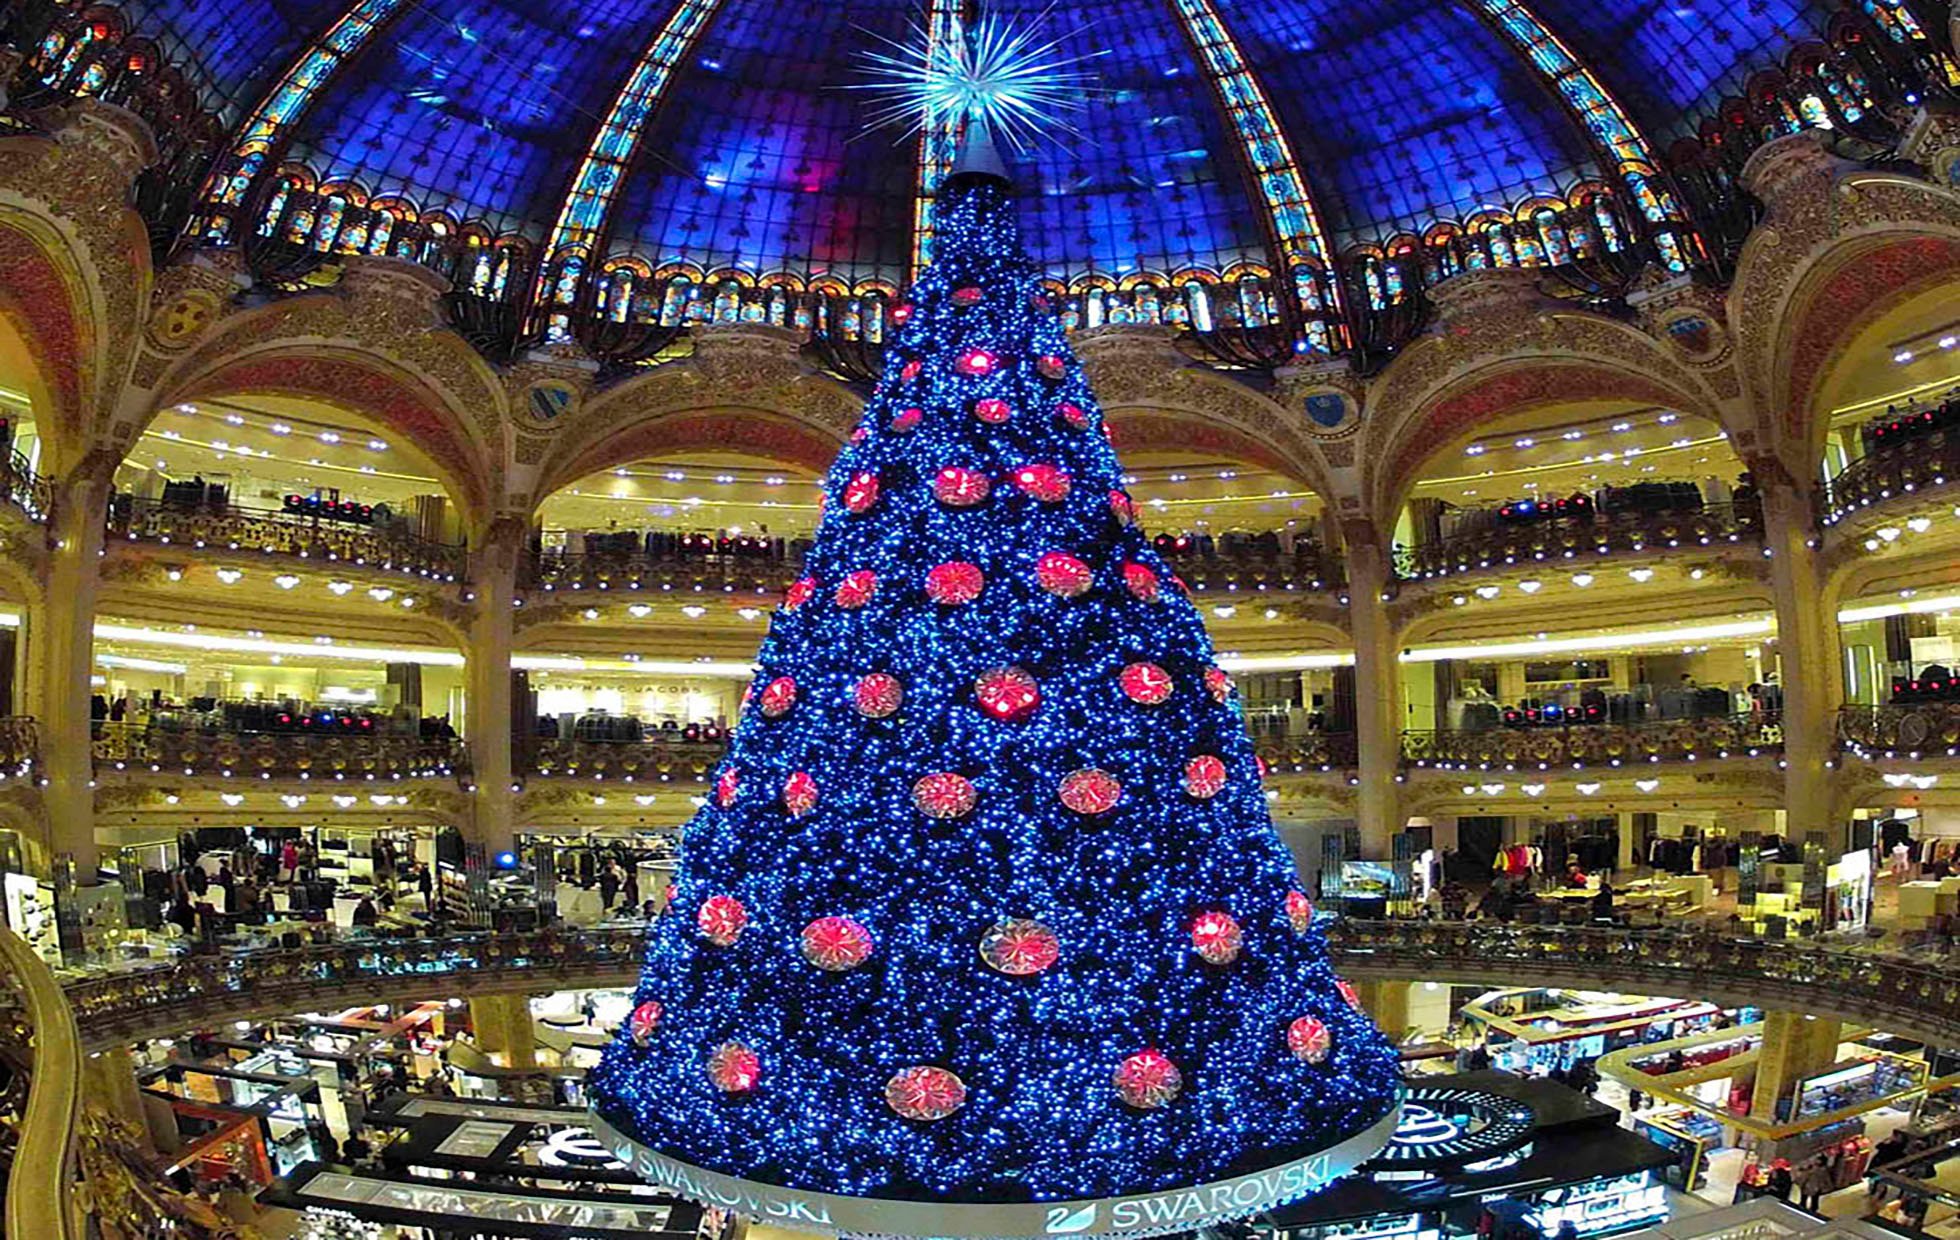 A giant Christmas tree stands in the middle of the Galeries Lafayette department store in Paris ahead of the holiday season in the French capital, December 13, 2012. REUTERS/Charles Platiau (FRANCE - Tags: SOCIETY)